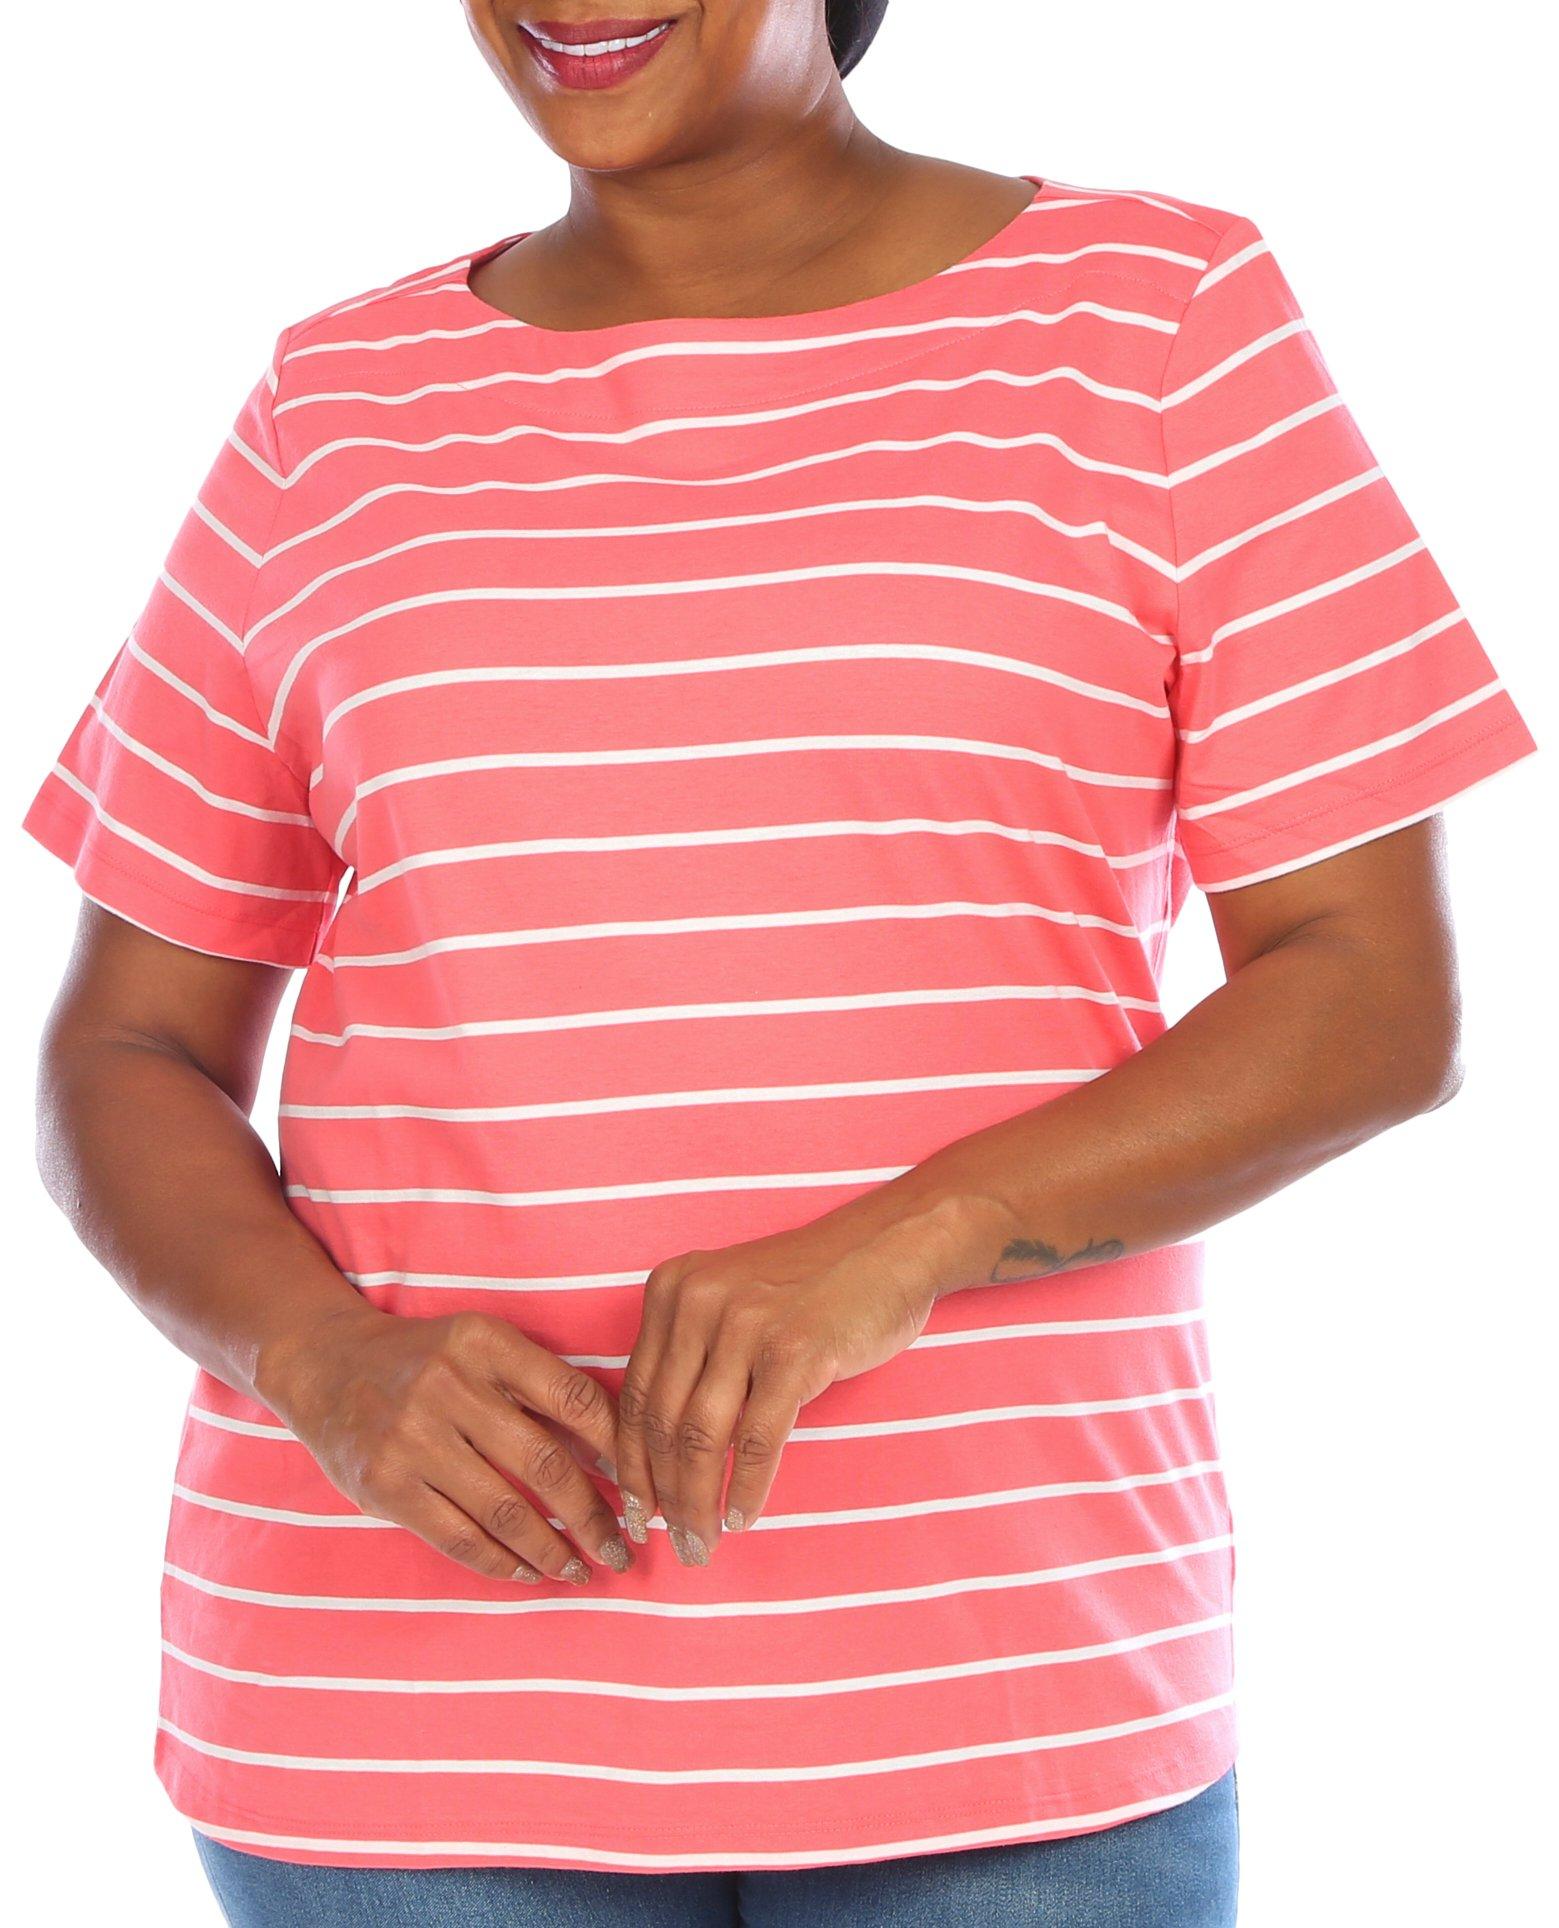 Coral Bay Plus Stripes Boat Neck Short Sleeve Top